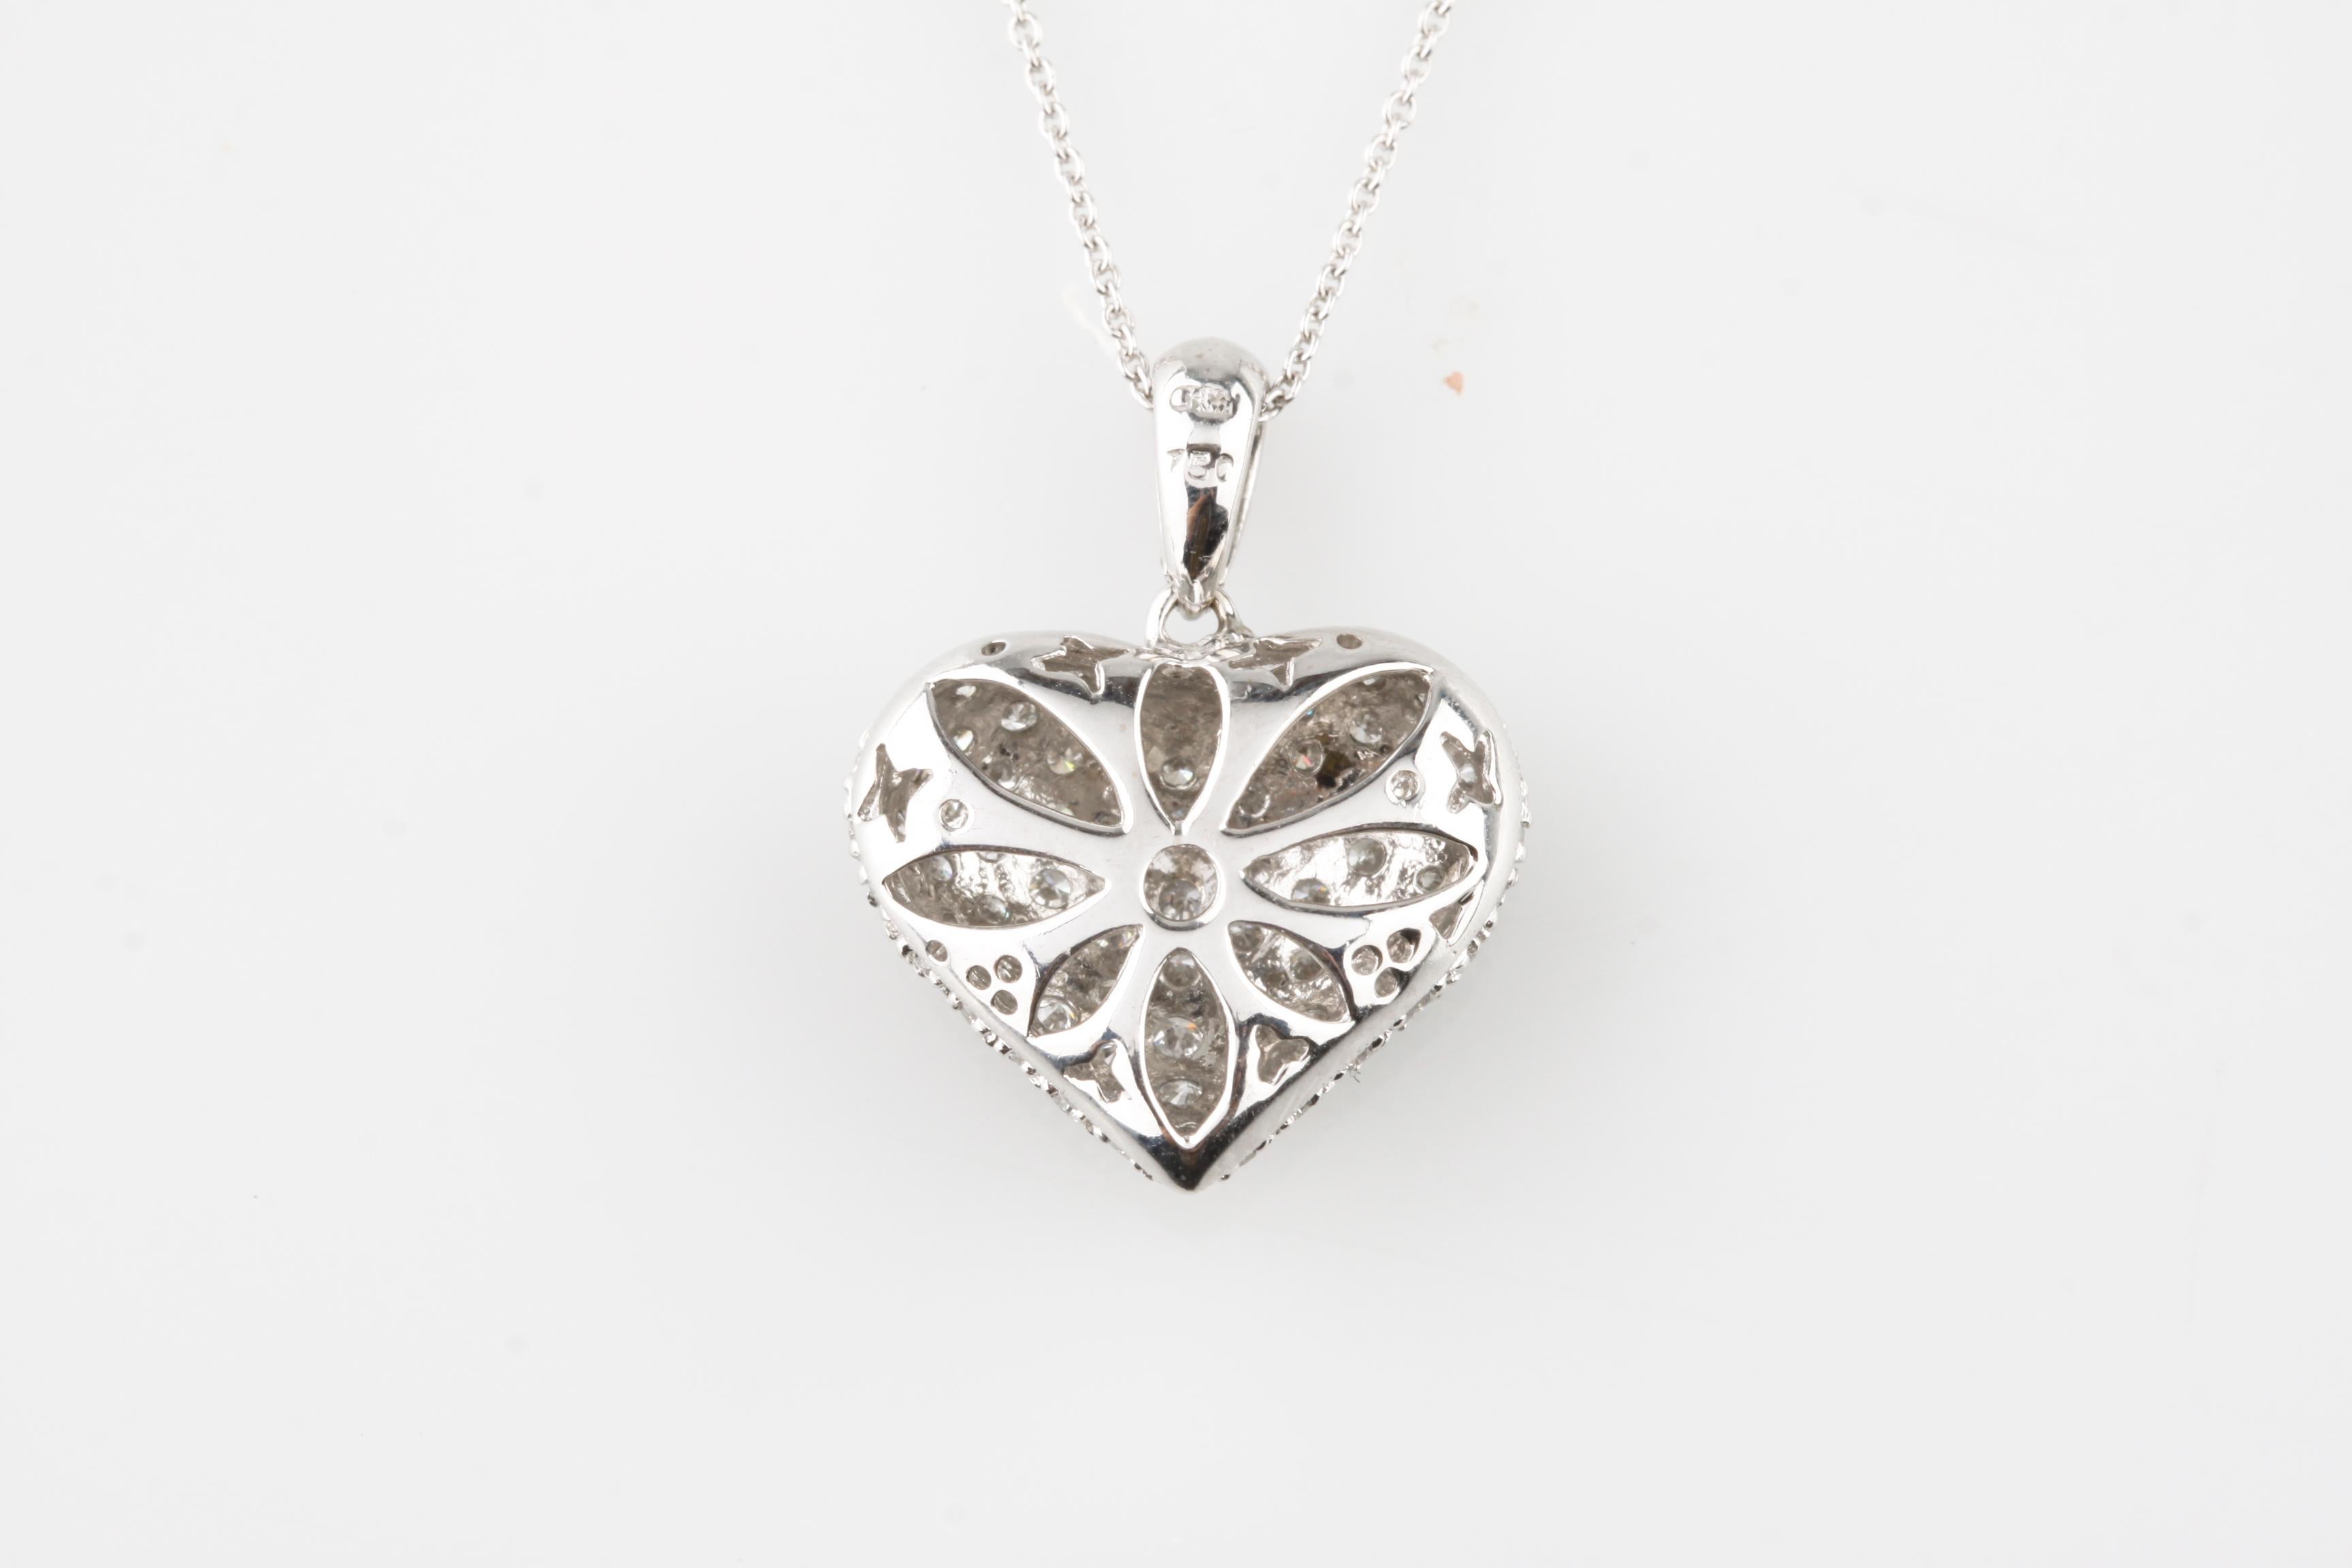 Gorgeous 18k White Gold Pavé Diamond Heart Pendant
Features 106 Round Cut Diamonds in Pavé Settings
Total Diamond Weight = Approximately 1.4 ct
Average Color = G - H
Average Clarity = VS
Width of Pendant = 18 mm
Length of Pendant (Including Bail) =